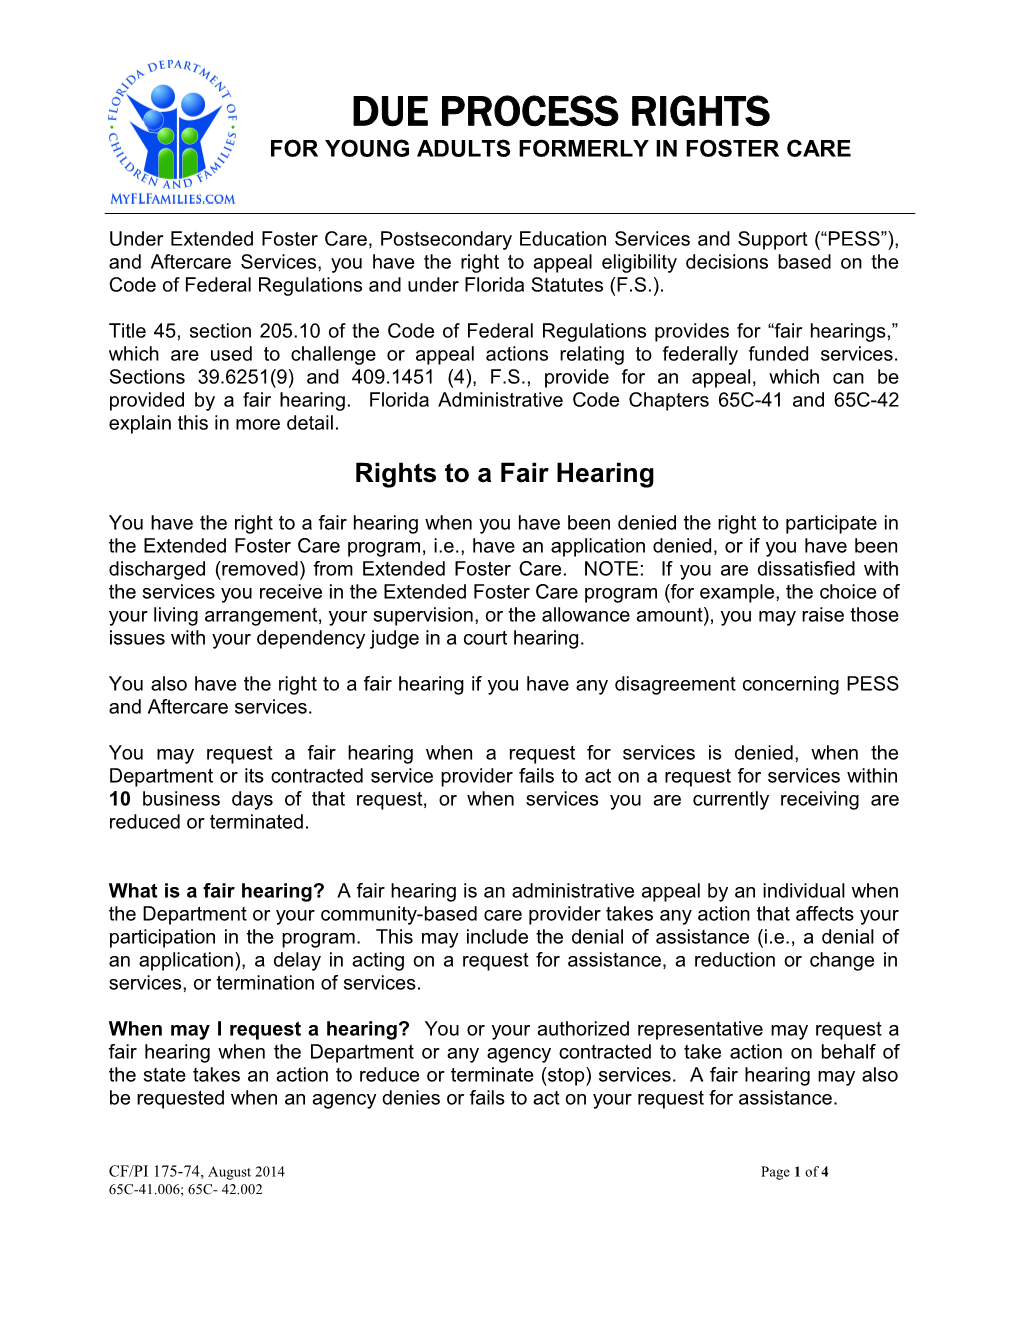 Rights to a Fair Hearing